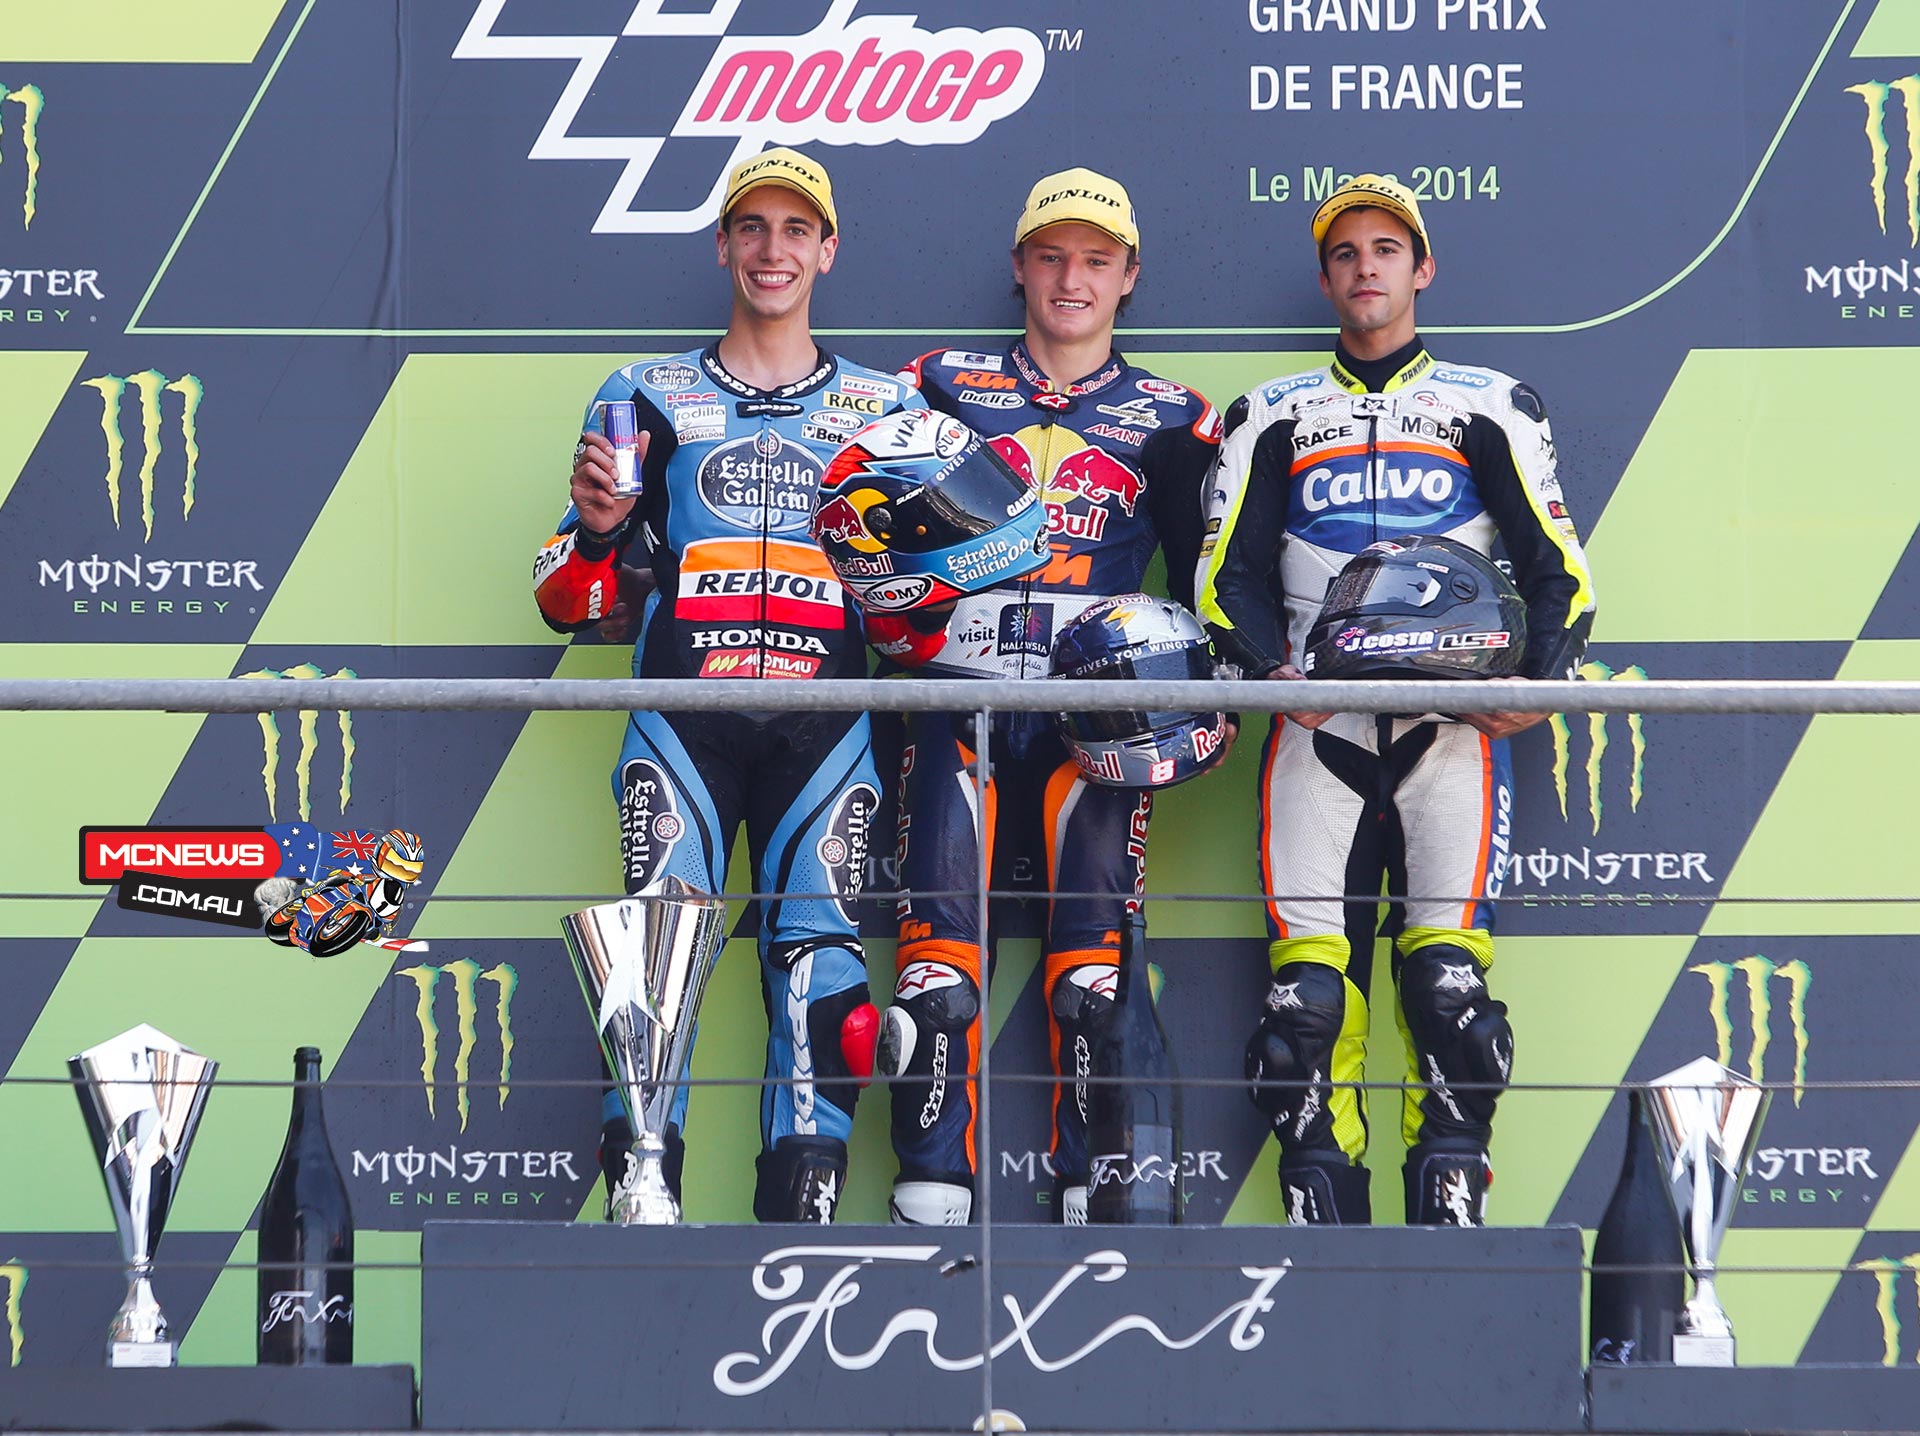 In perfect conditions at the Monster Energy Grand Prix de France Jack Miller (Red Bull KTM Ajo) took victory in another exciting Moto3™ contest, with Alex Rins (Estrella Galicia 0,0) and Isaac Viñales (Calvo Team) joining him on the Le Mans podium.